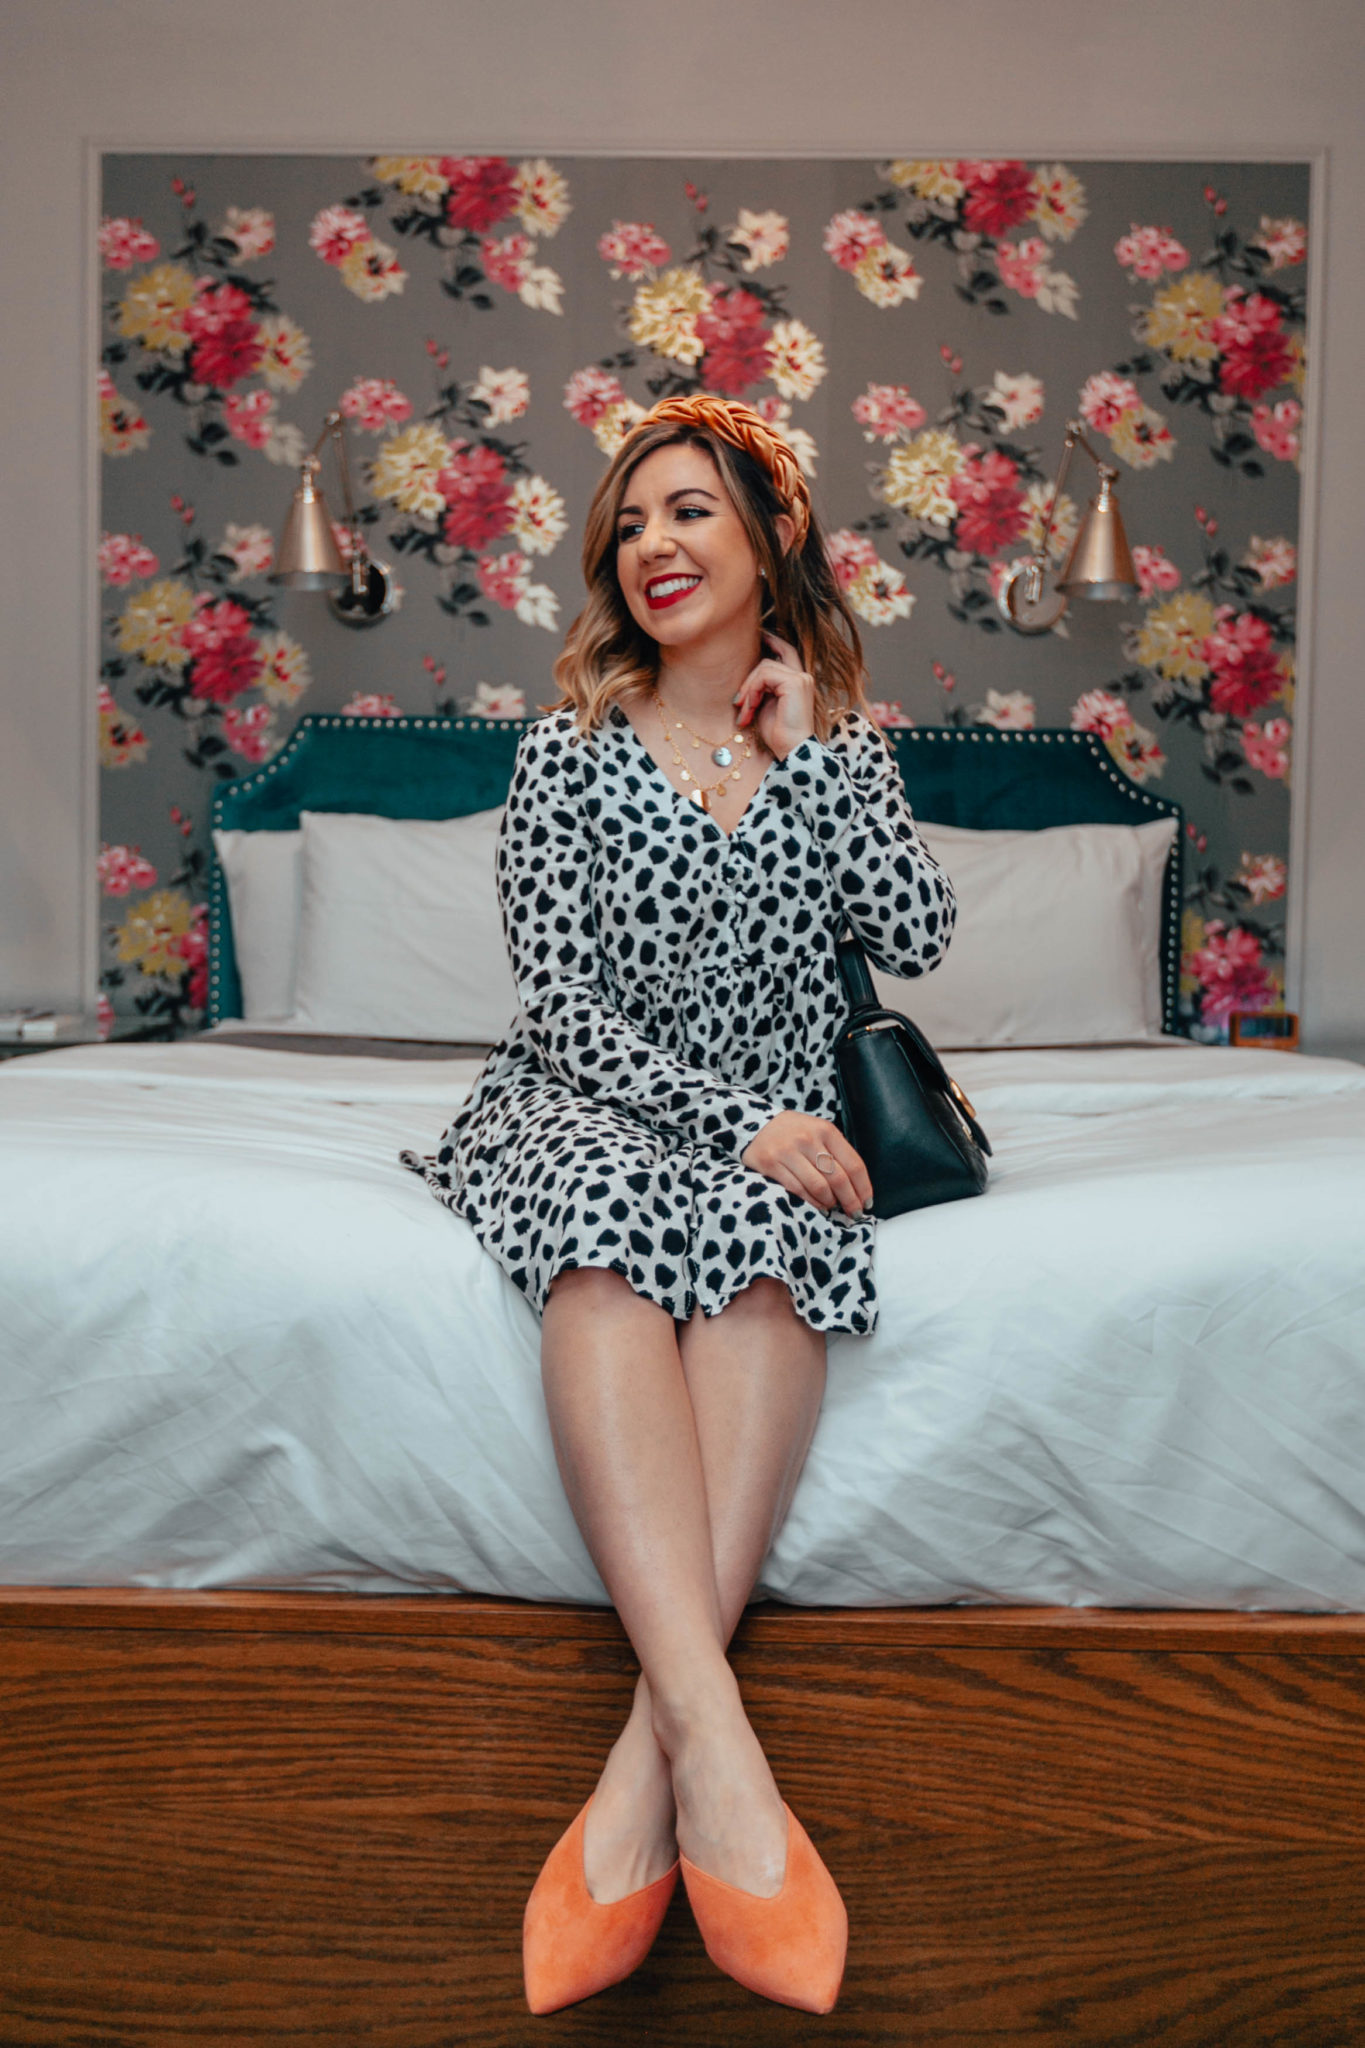 ASOS Leopard Dress styled by top US fashion blog, Glass of Glam: image of a woman wearing an ASOS leopard dress, Sole Society mules, breaded velvet headband, Gucci Small Marmont and ETTIKA necklace